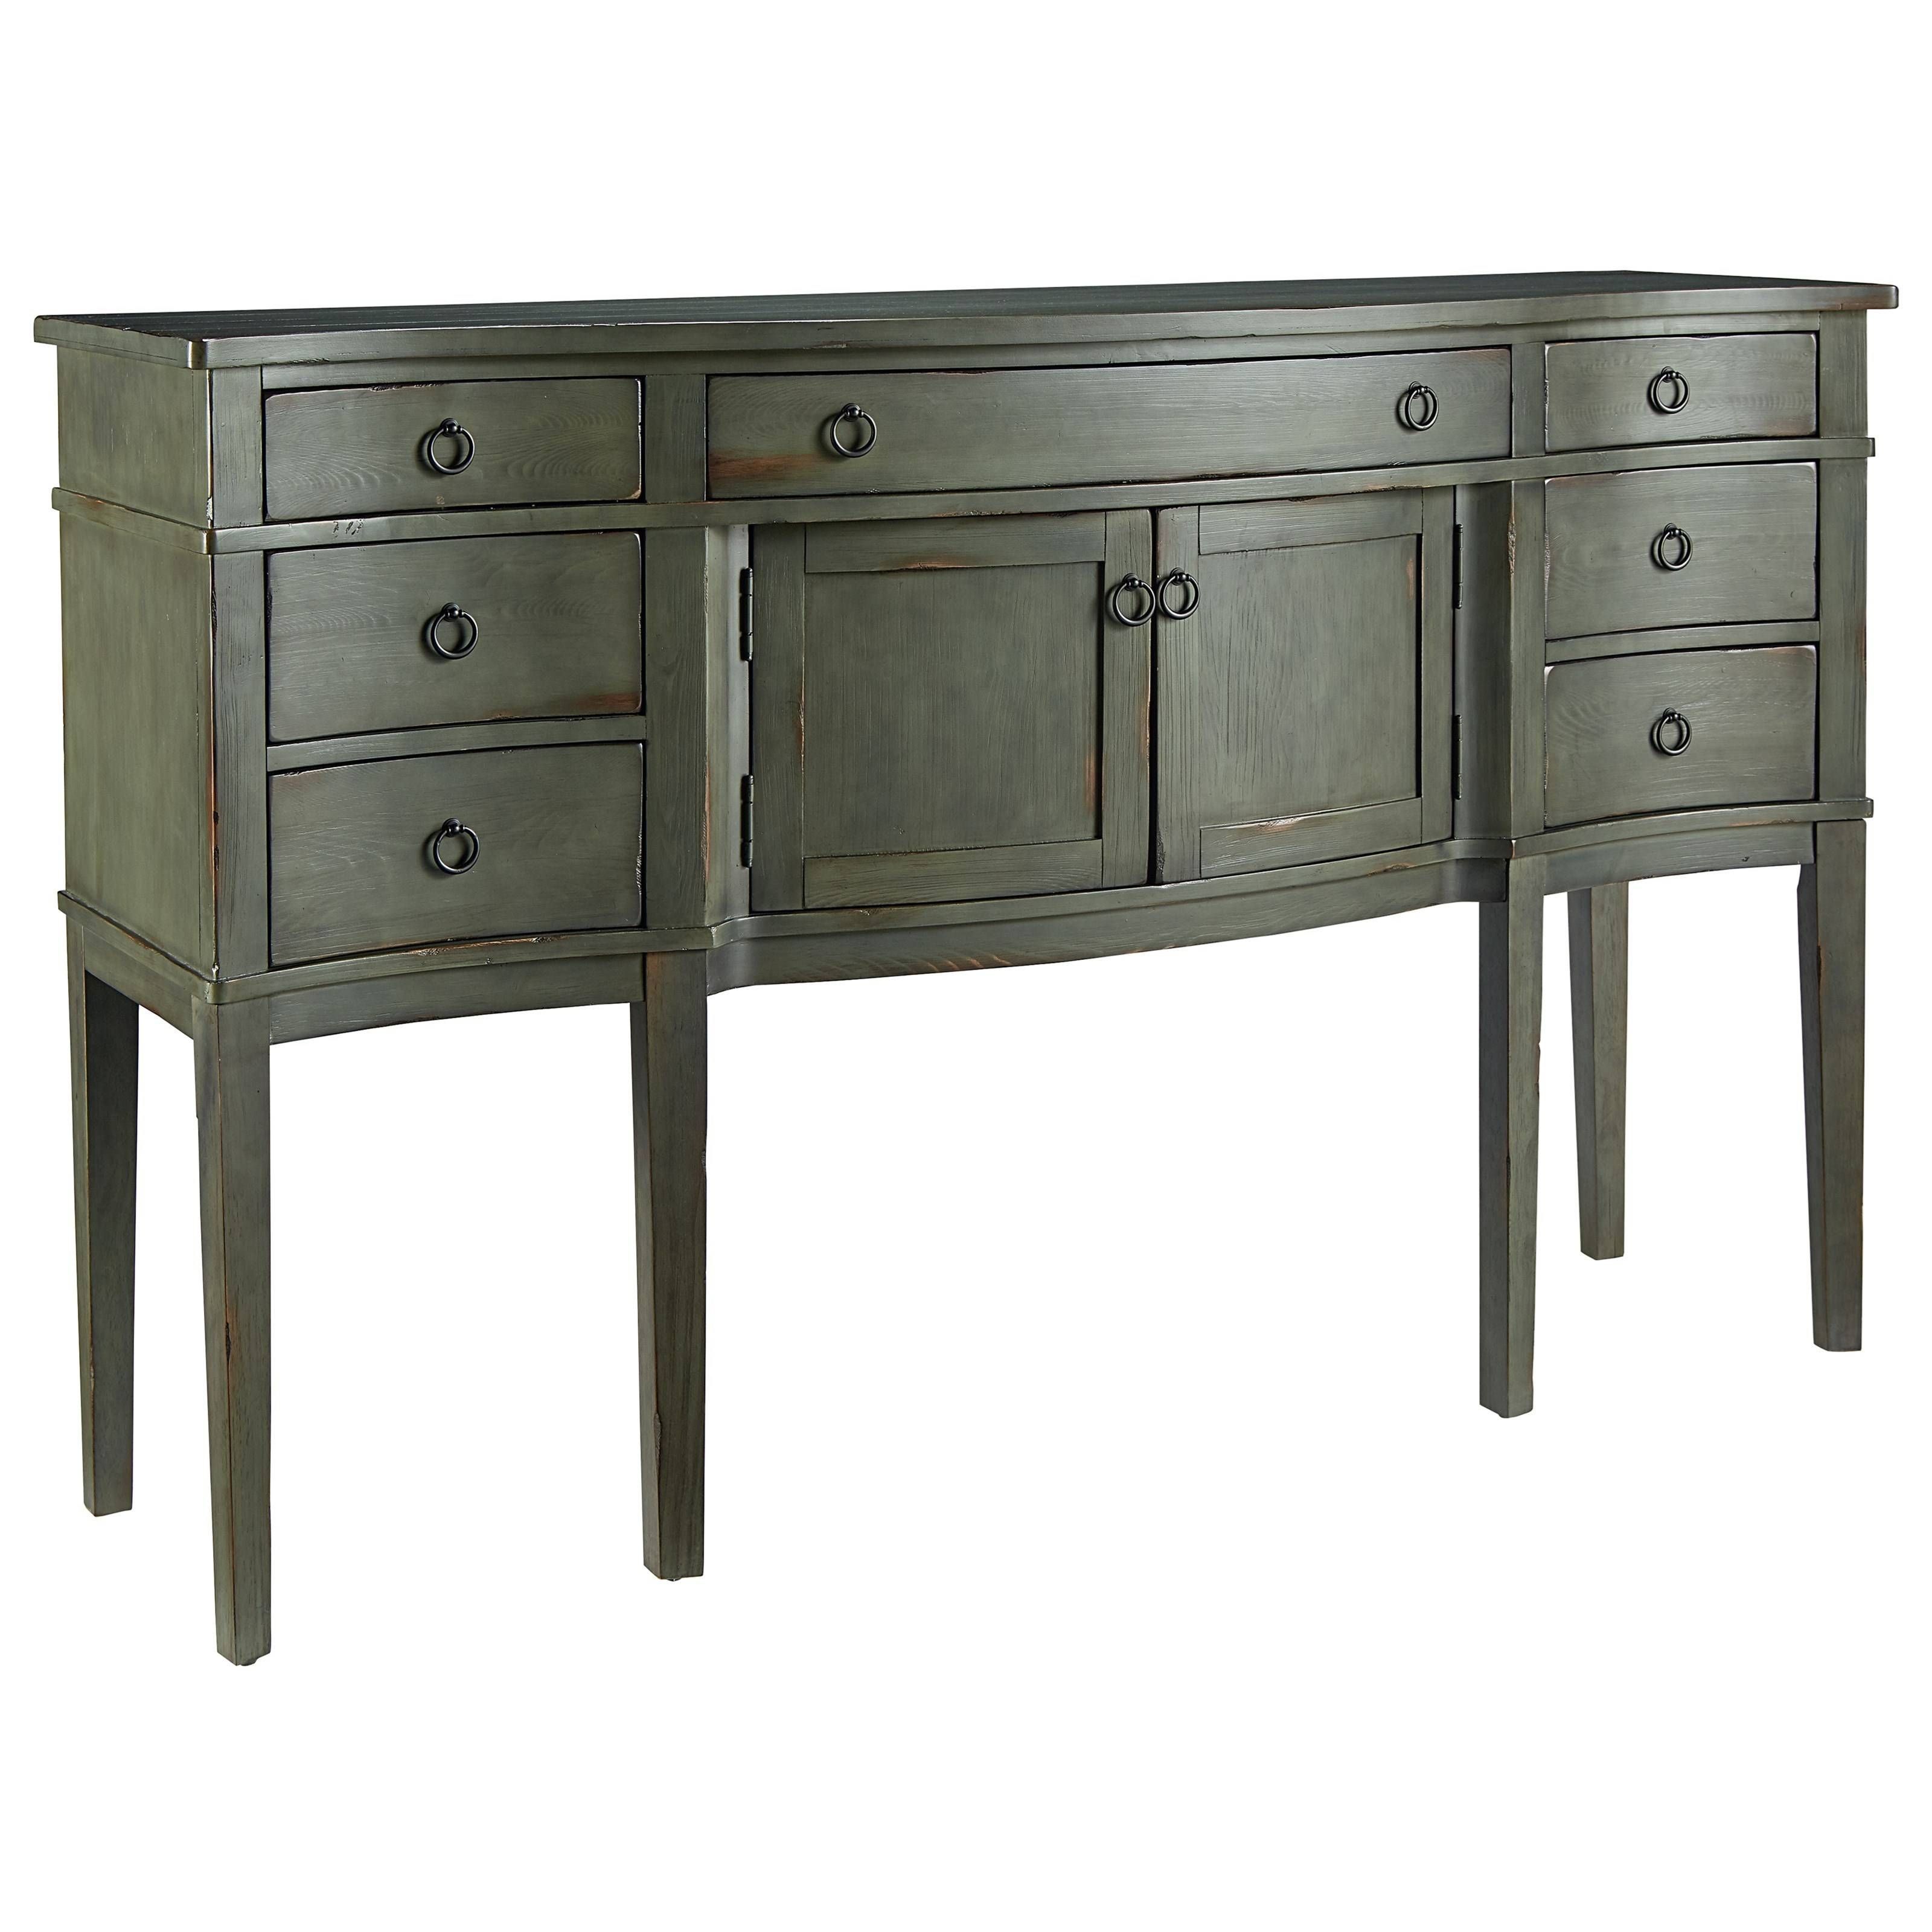 Beautiful Sideboards And Servers – Bjdgjy Throughout Sideboards And Servers (View 12 of 15)